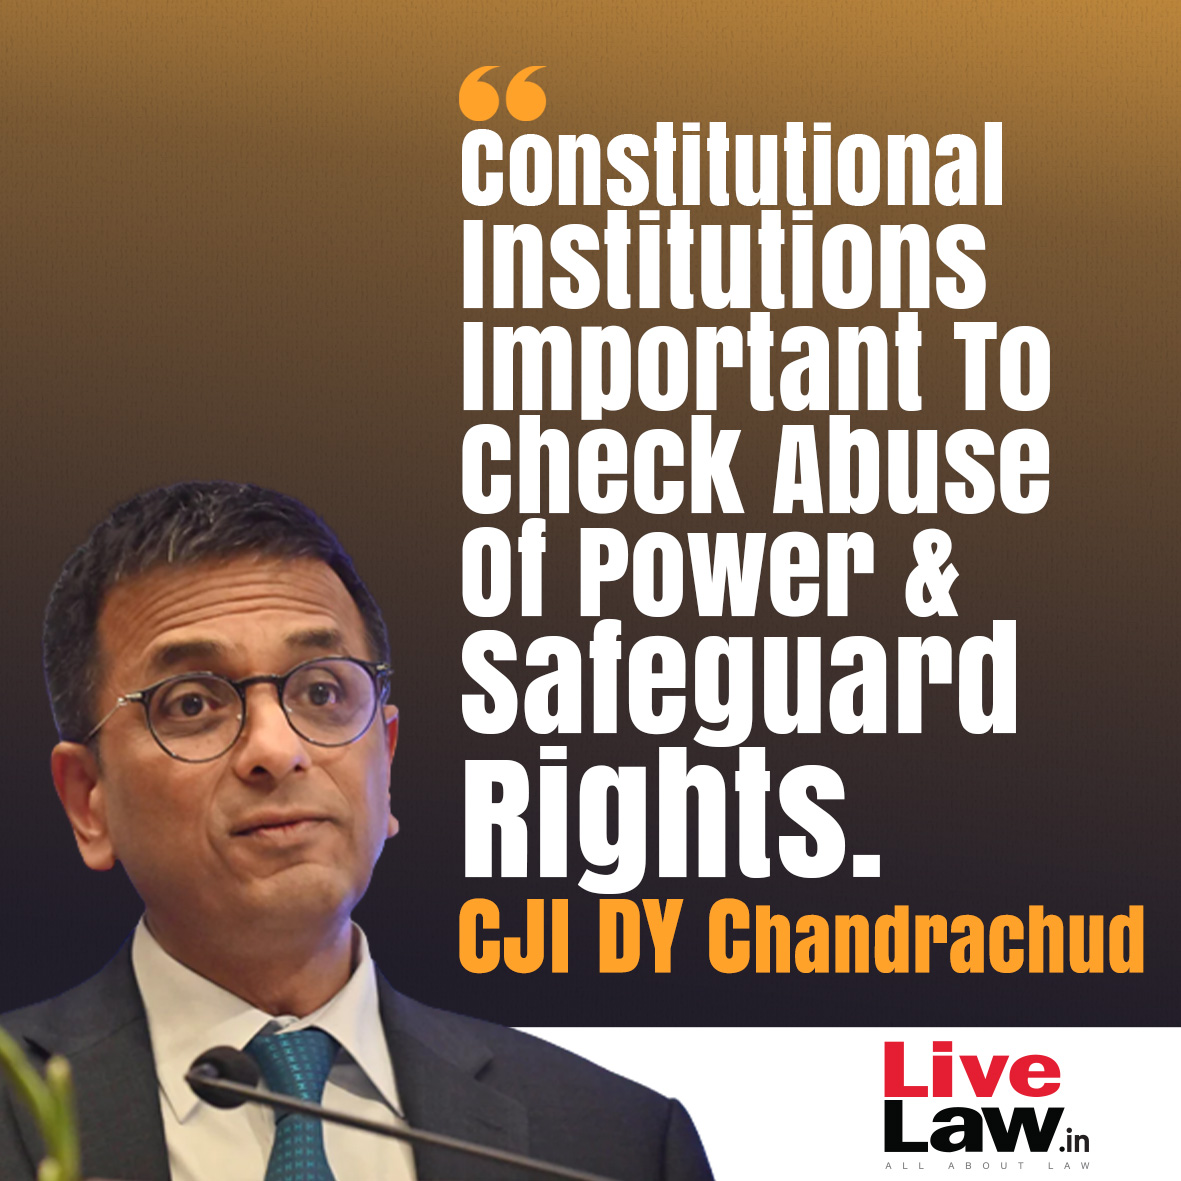 Chief Justice of India DY Chandrachud, in a recent lecture delivered at the Cambridge Law University, highlighted the importance of Constitutional institutions, without which the constitutional rights and values cannot be safeguarded.
Read more: lnkd.in/gK77x-XP…